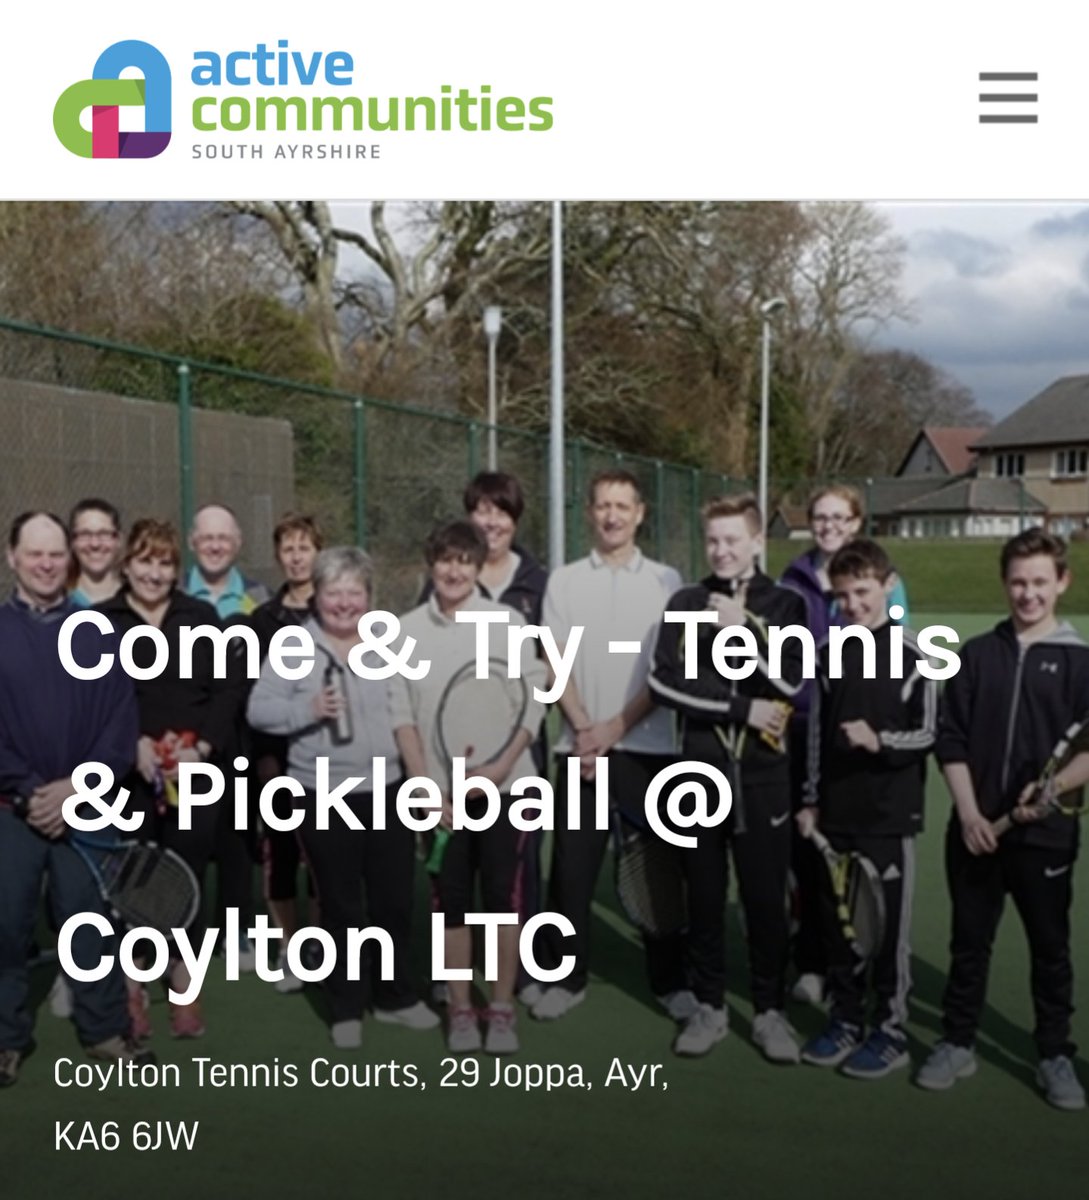 ⭐ Play Tennis & Pickleball for free each over the Easter holidays. 🎾 Open to age 8+ sessions will be hosted at @Coylton Tennis Courts, each Thursday - 13.00-15.00! Book online to reserve your spot now... shorturl.at/egloq @CoyltonPrimary @CoyltonCommCo